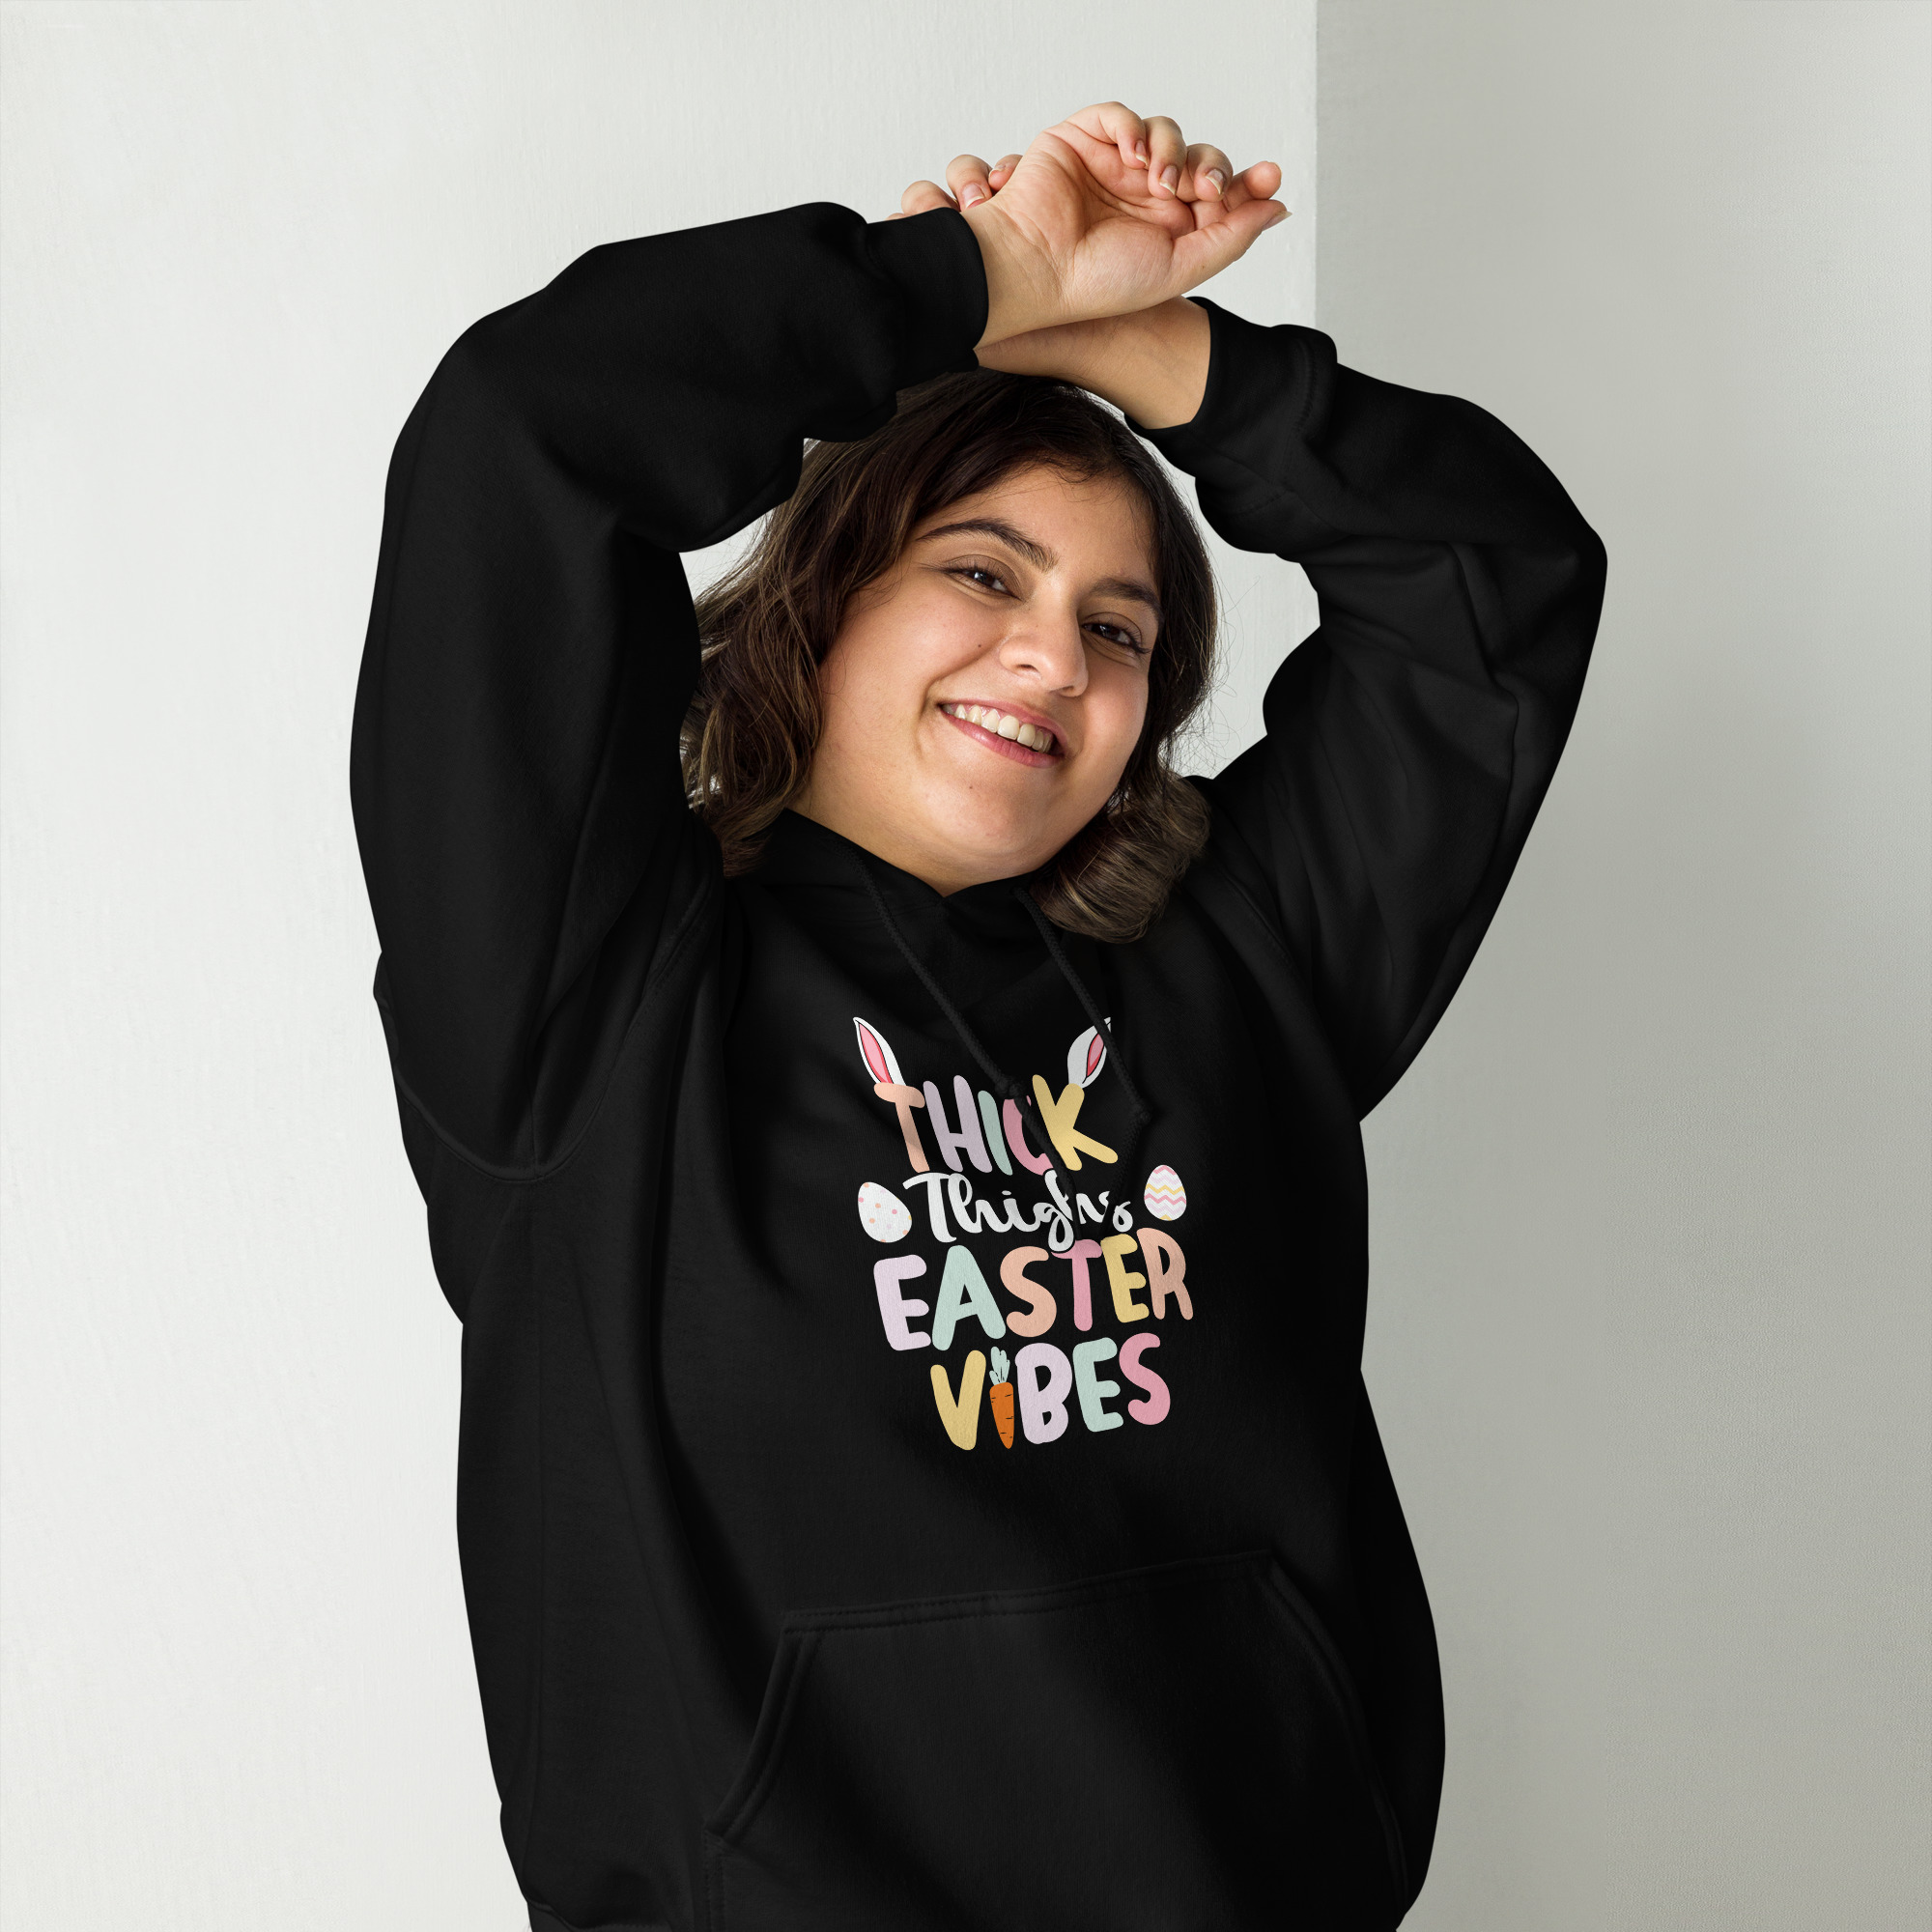 "thick thighs easter vibes" women's hoodie